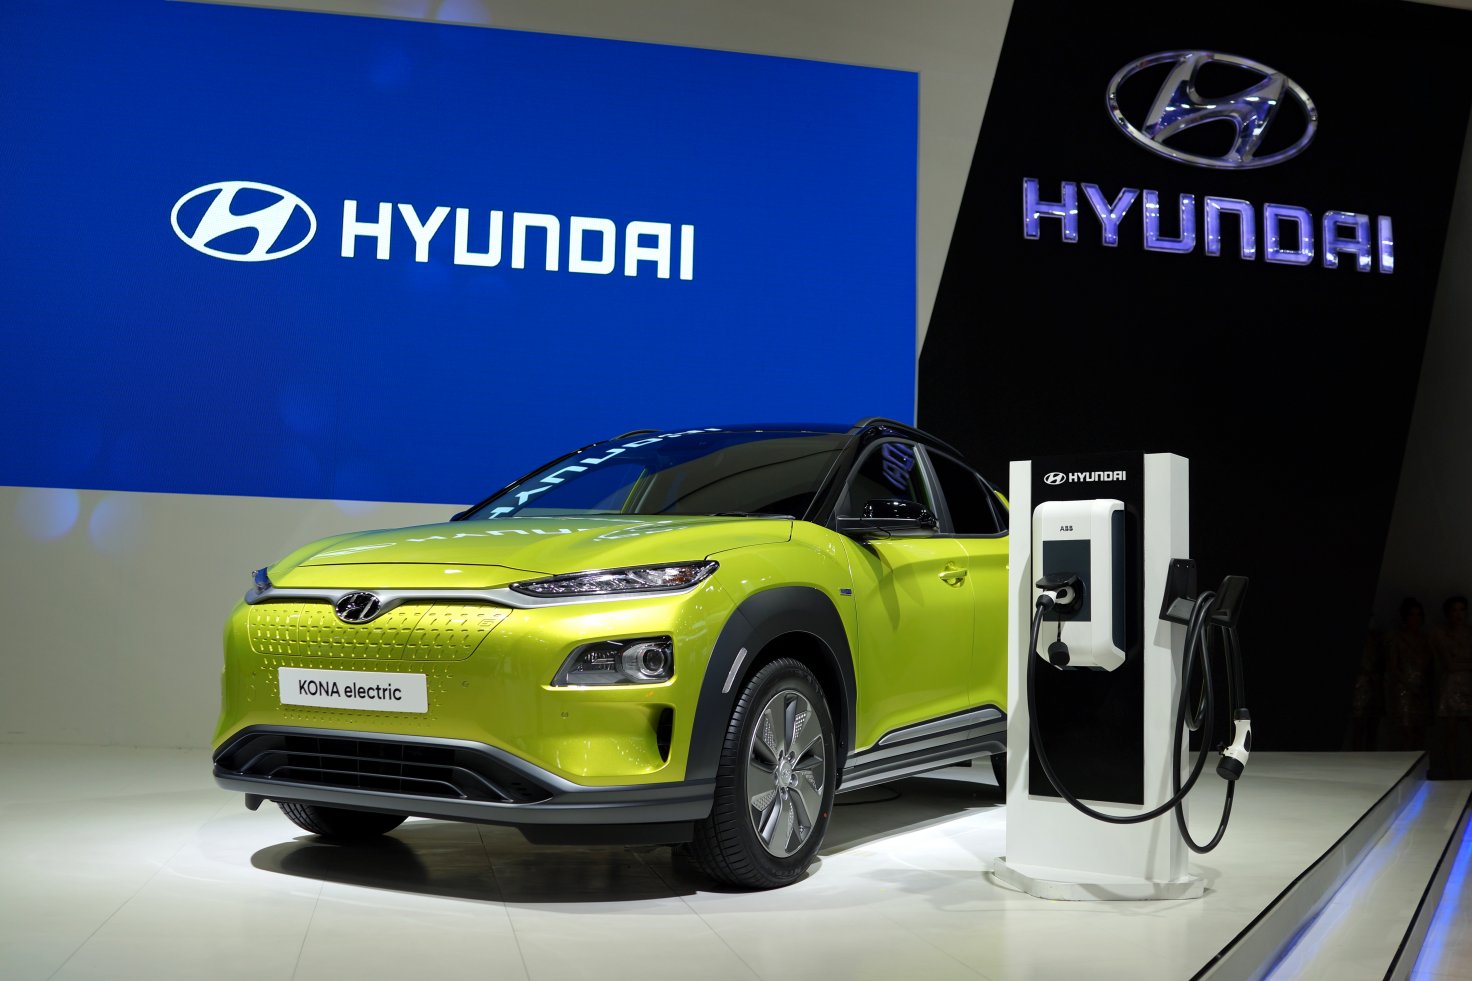 Hyundai Motor said it will replace battery systems in around 82,000 electric vehicles worldwide due to fire risks. | Currency.com